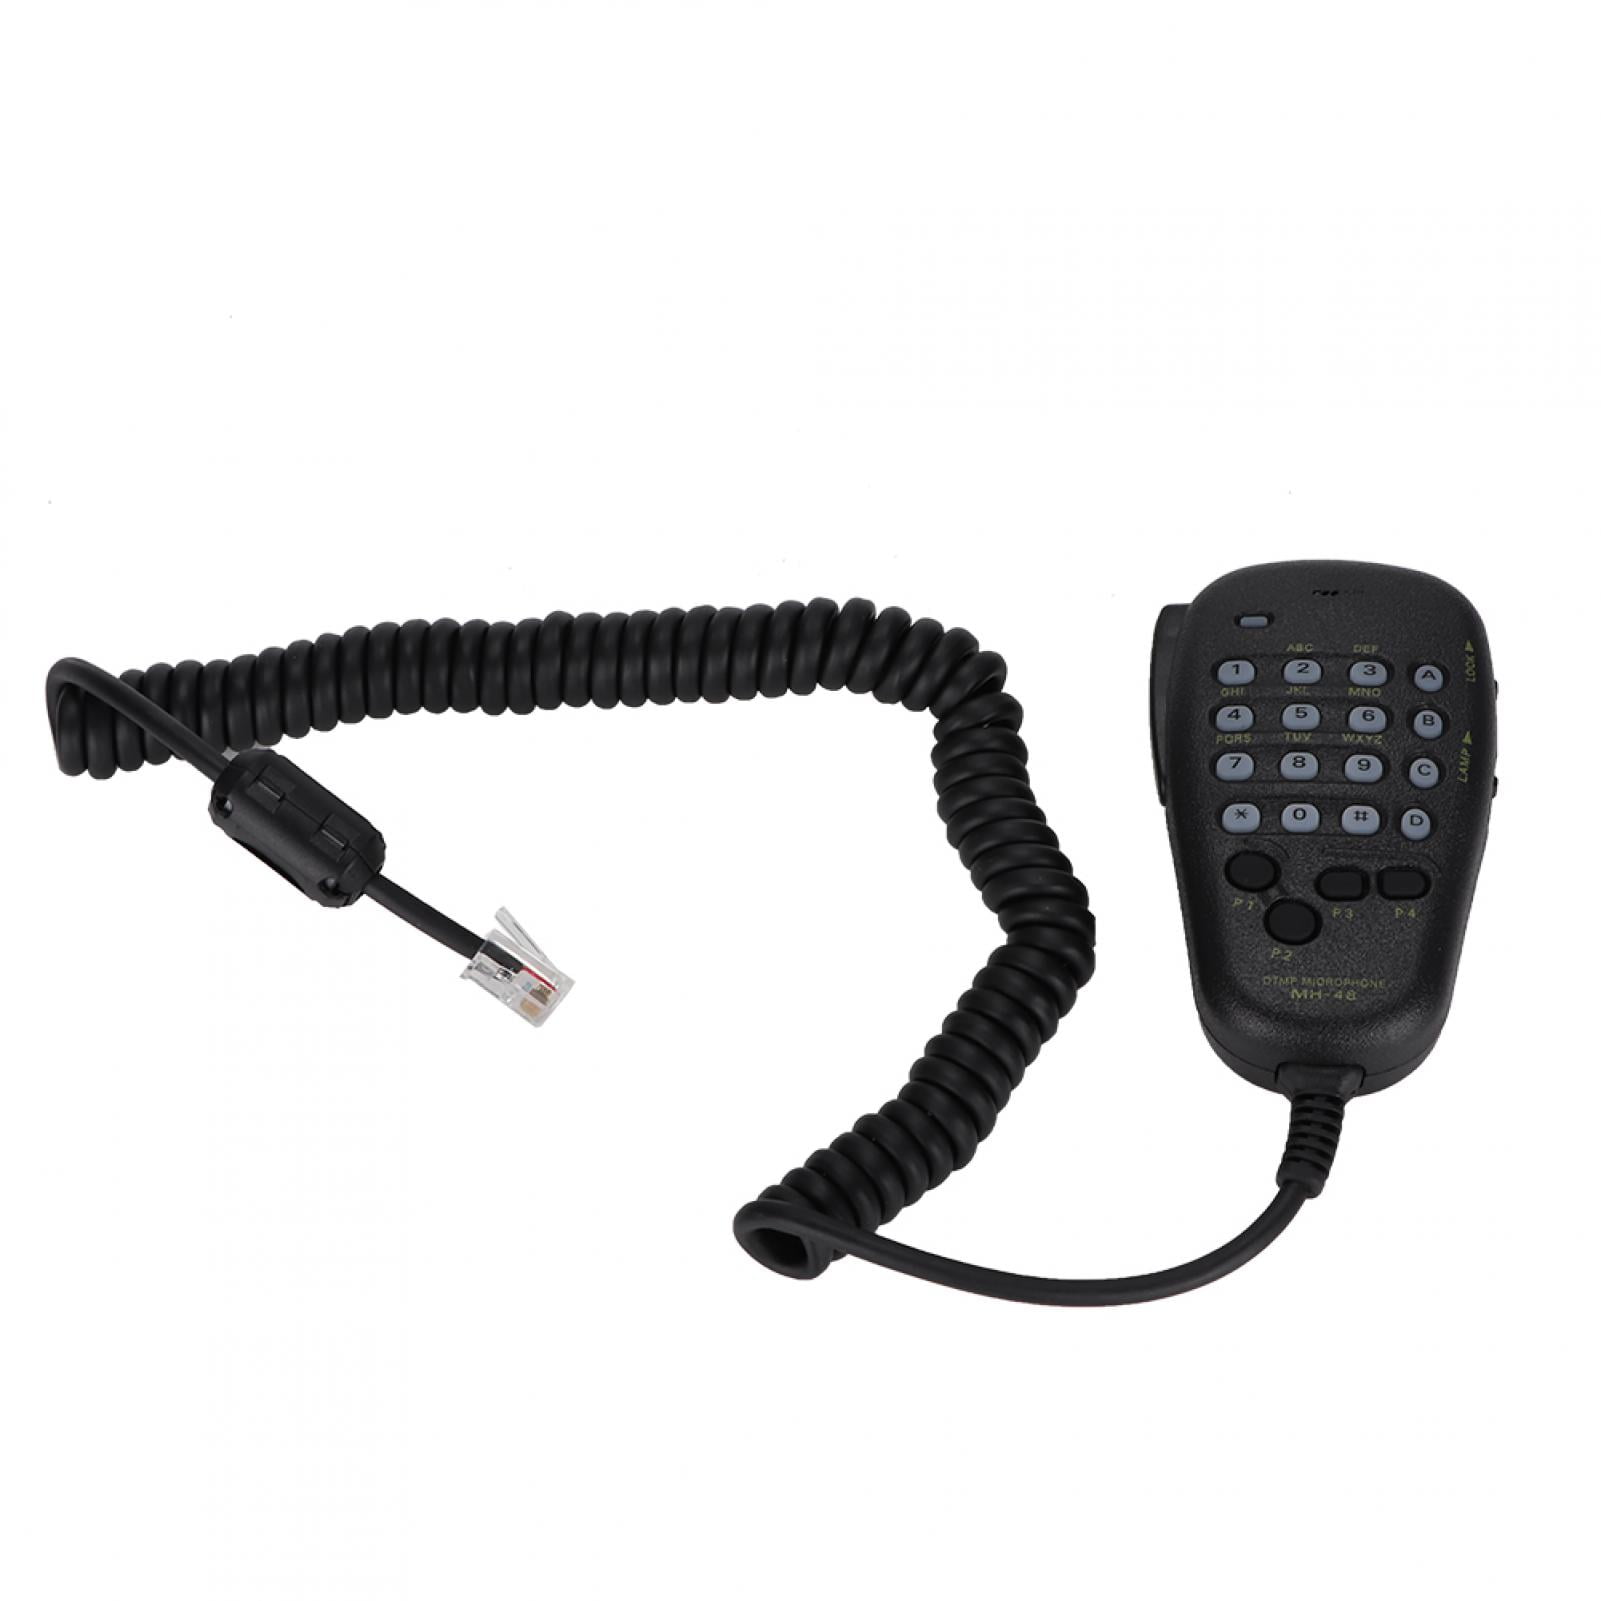 MH-48A6J DTMF Hand Mic for Yaesu Two Way Radio FT-1500M 2800M FT-7800R FT-8900R 